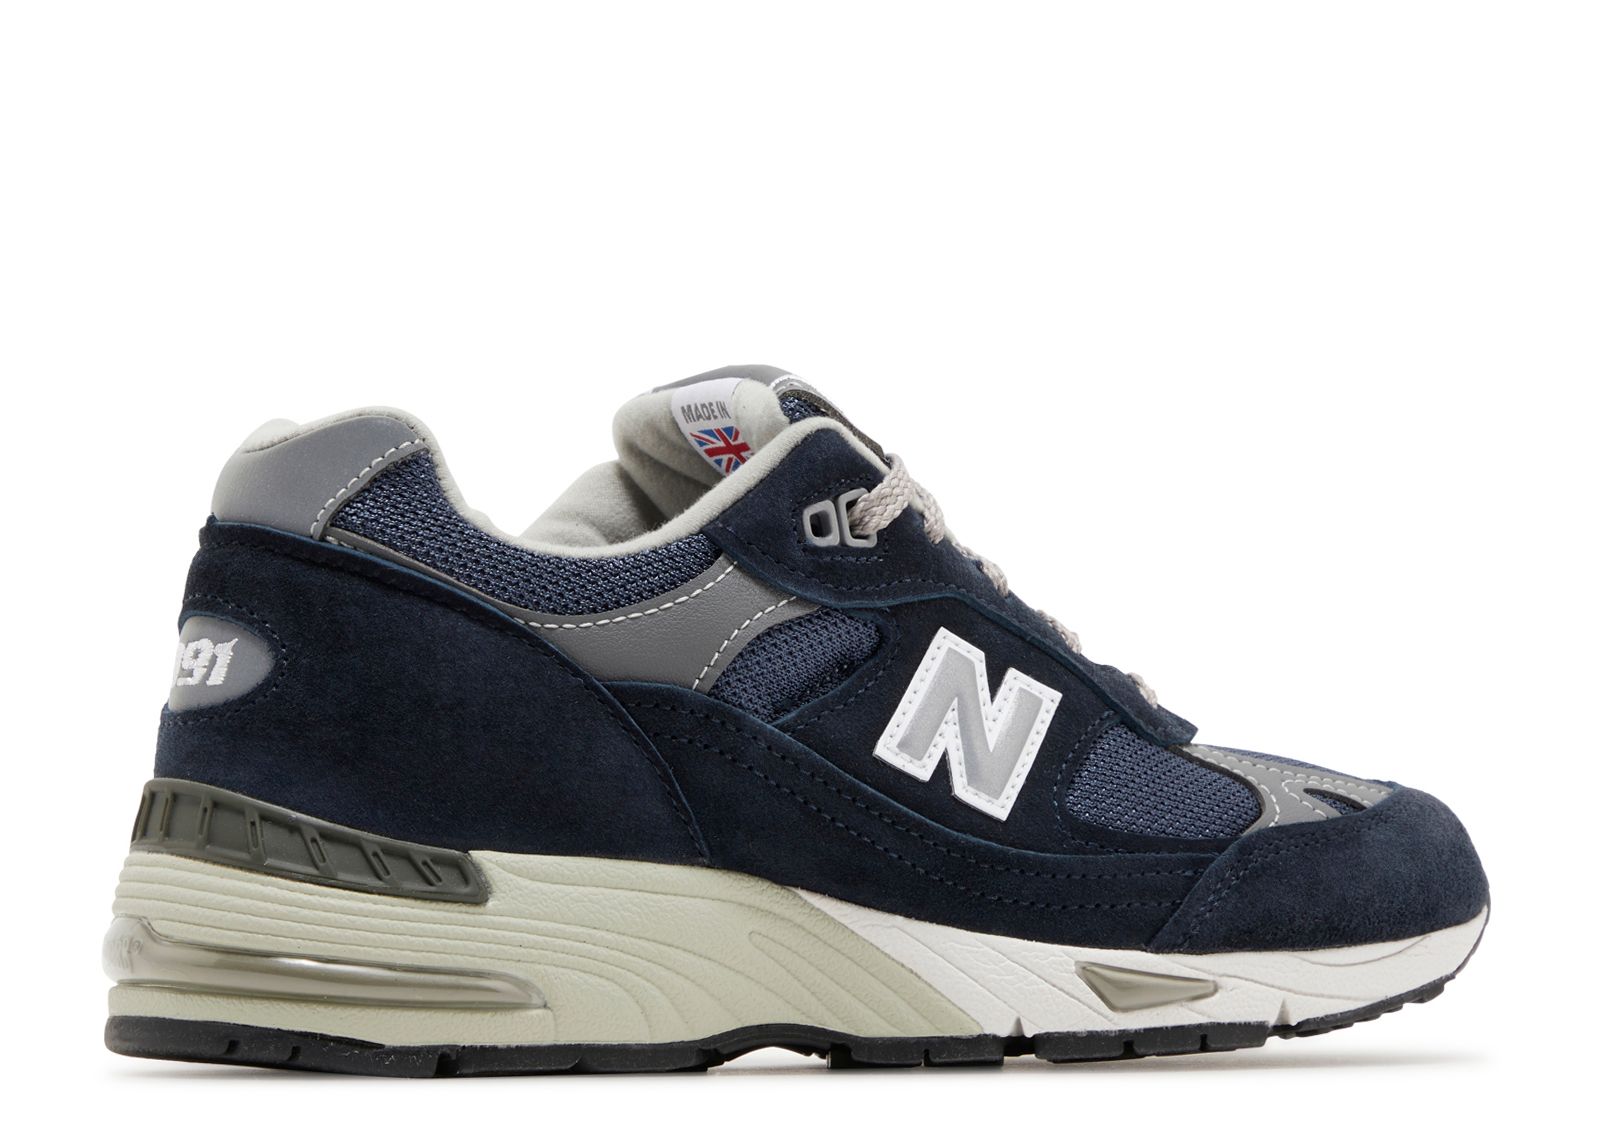 Wmns 991 Made In England 'Navy' - New Balance - W991NV - navy ...